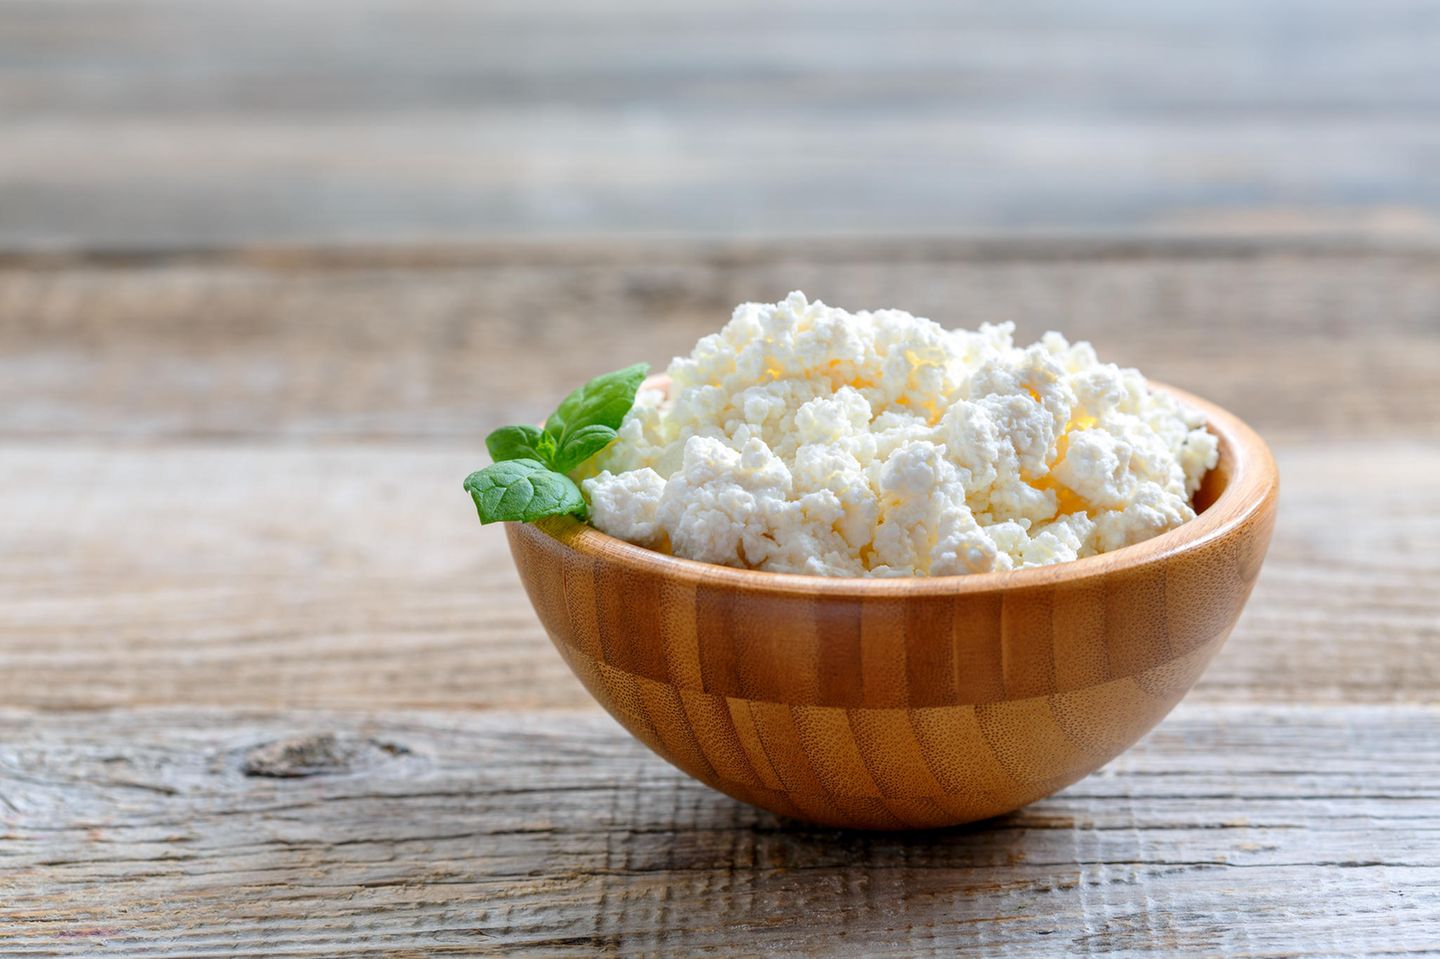 Cottage cheese: Cottage cheese in a bowl